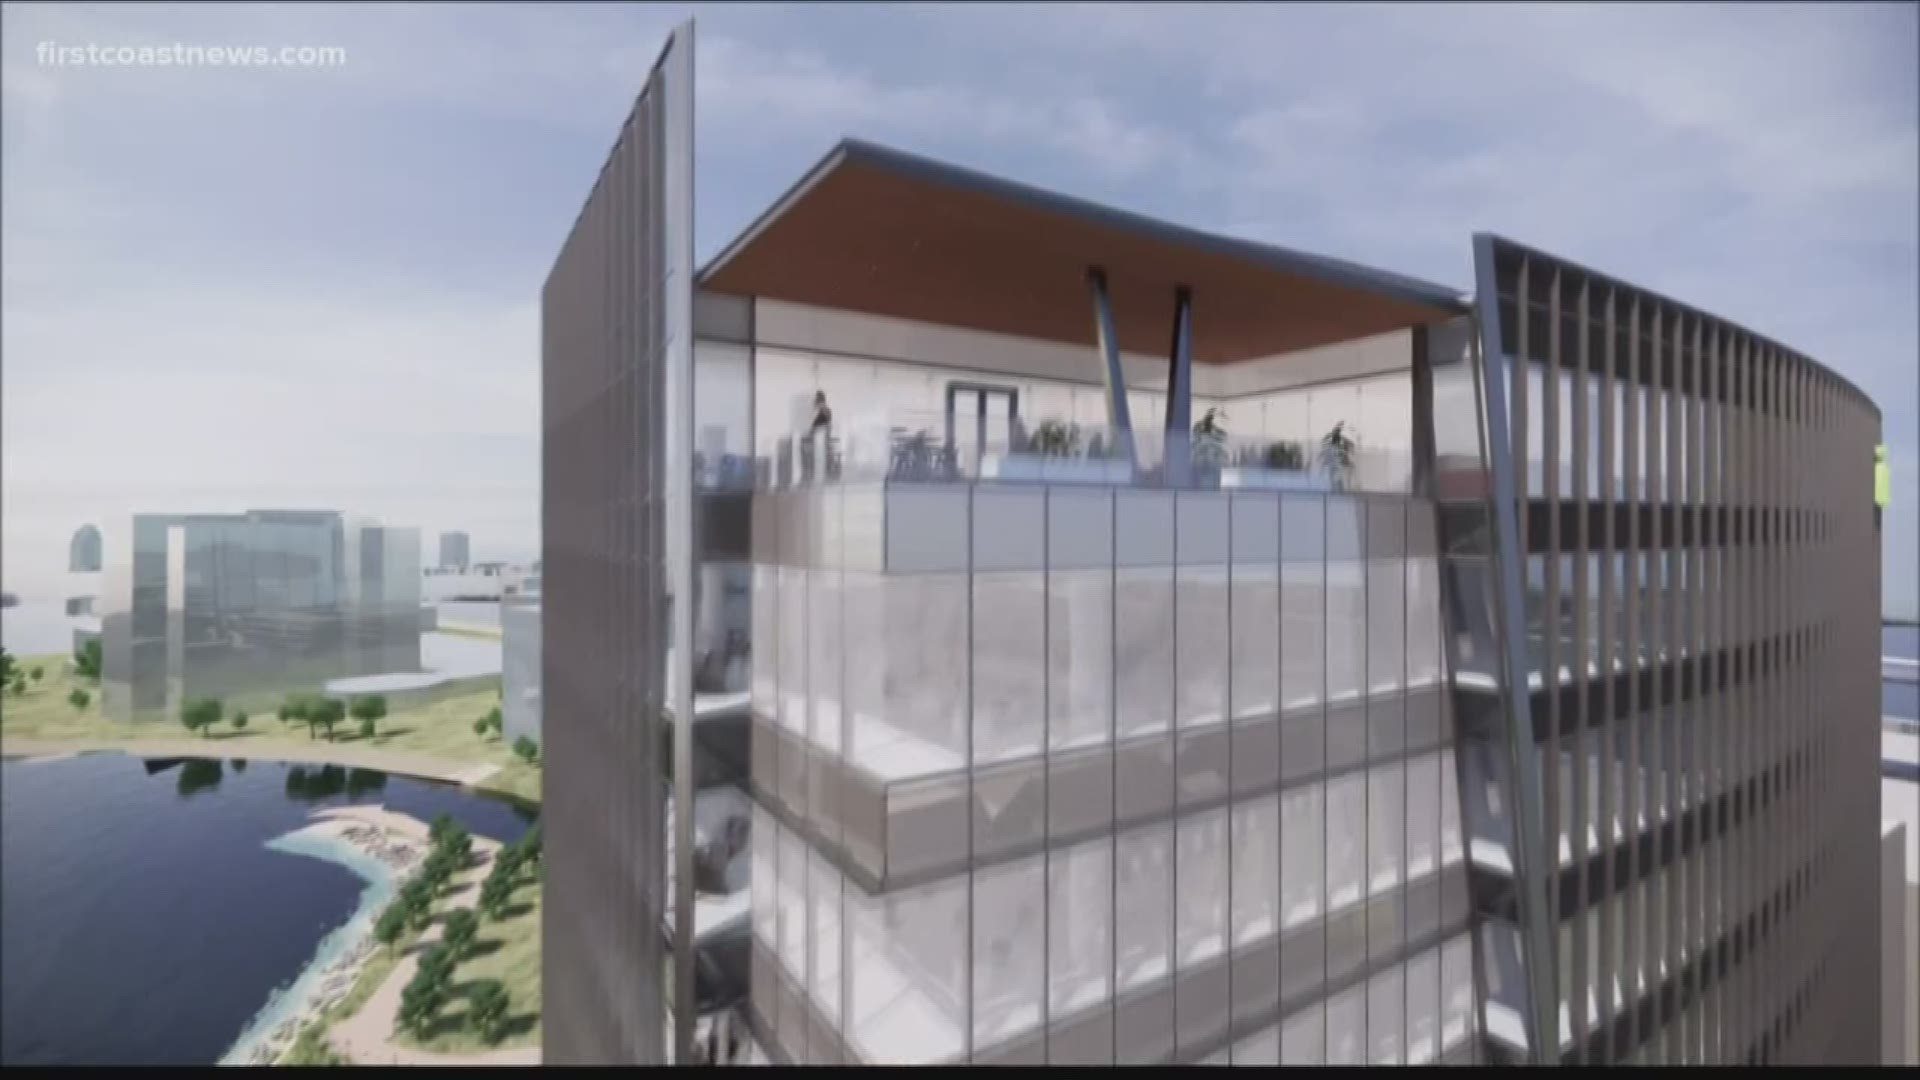 On Friday, DeSantis said the headquarters is expected to be built by June 2022. It will be 12 stories and roughly 300,000 square feet.